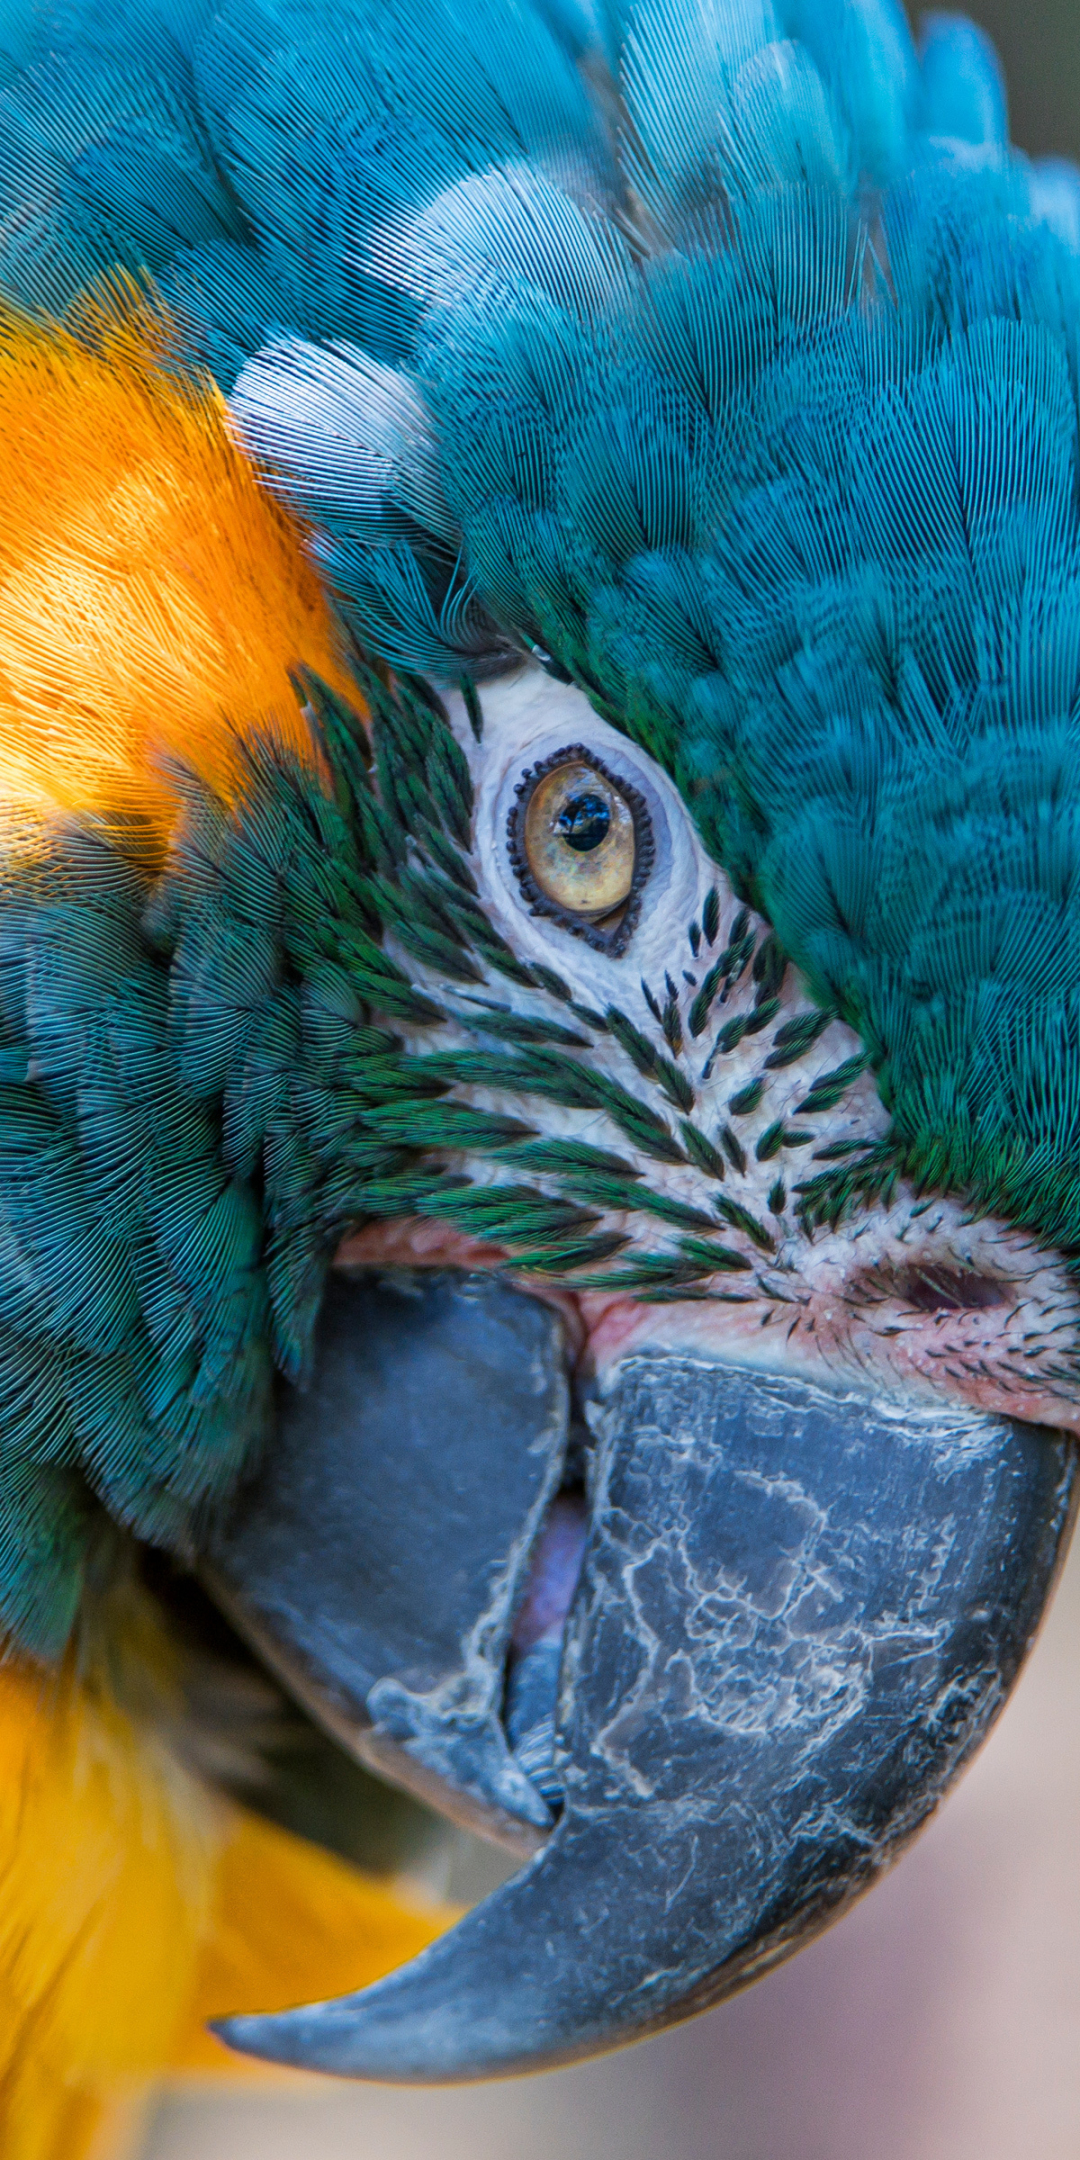 Macaw, parrot, colorful bird, muzzle, close up, 1080x2160 wallpaper